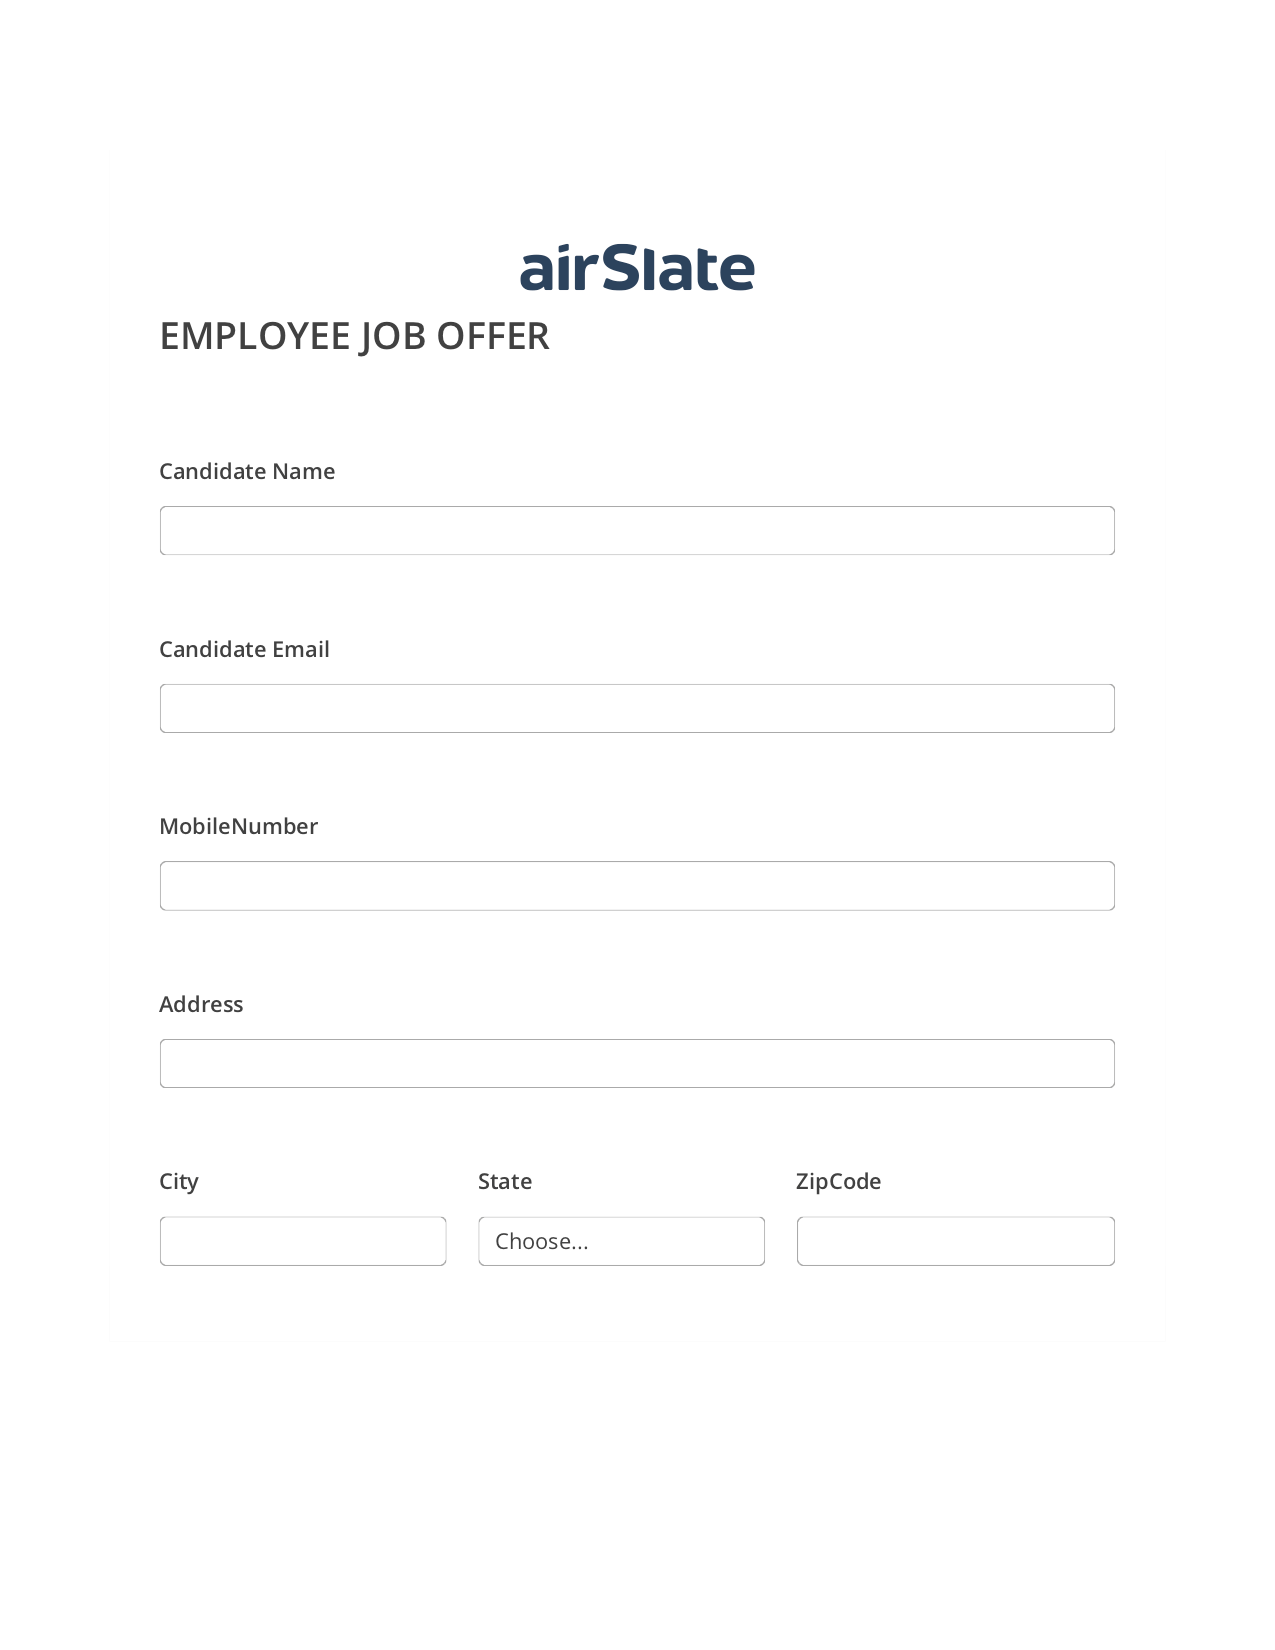 Employee Job Offer Workflow Pre-fill from another Slate Bot, Remove Slate Bot, Export to Excel 365 Bot